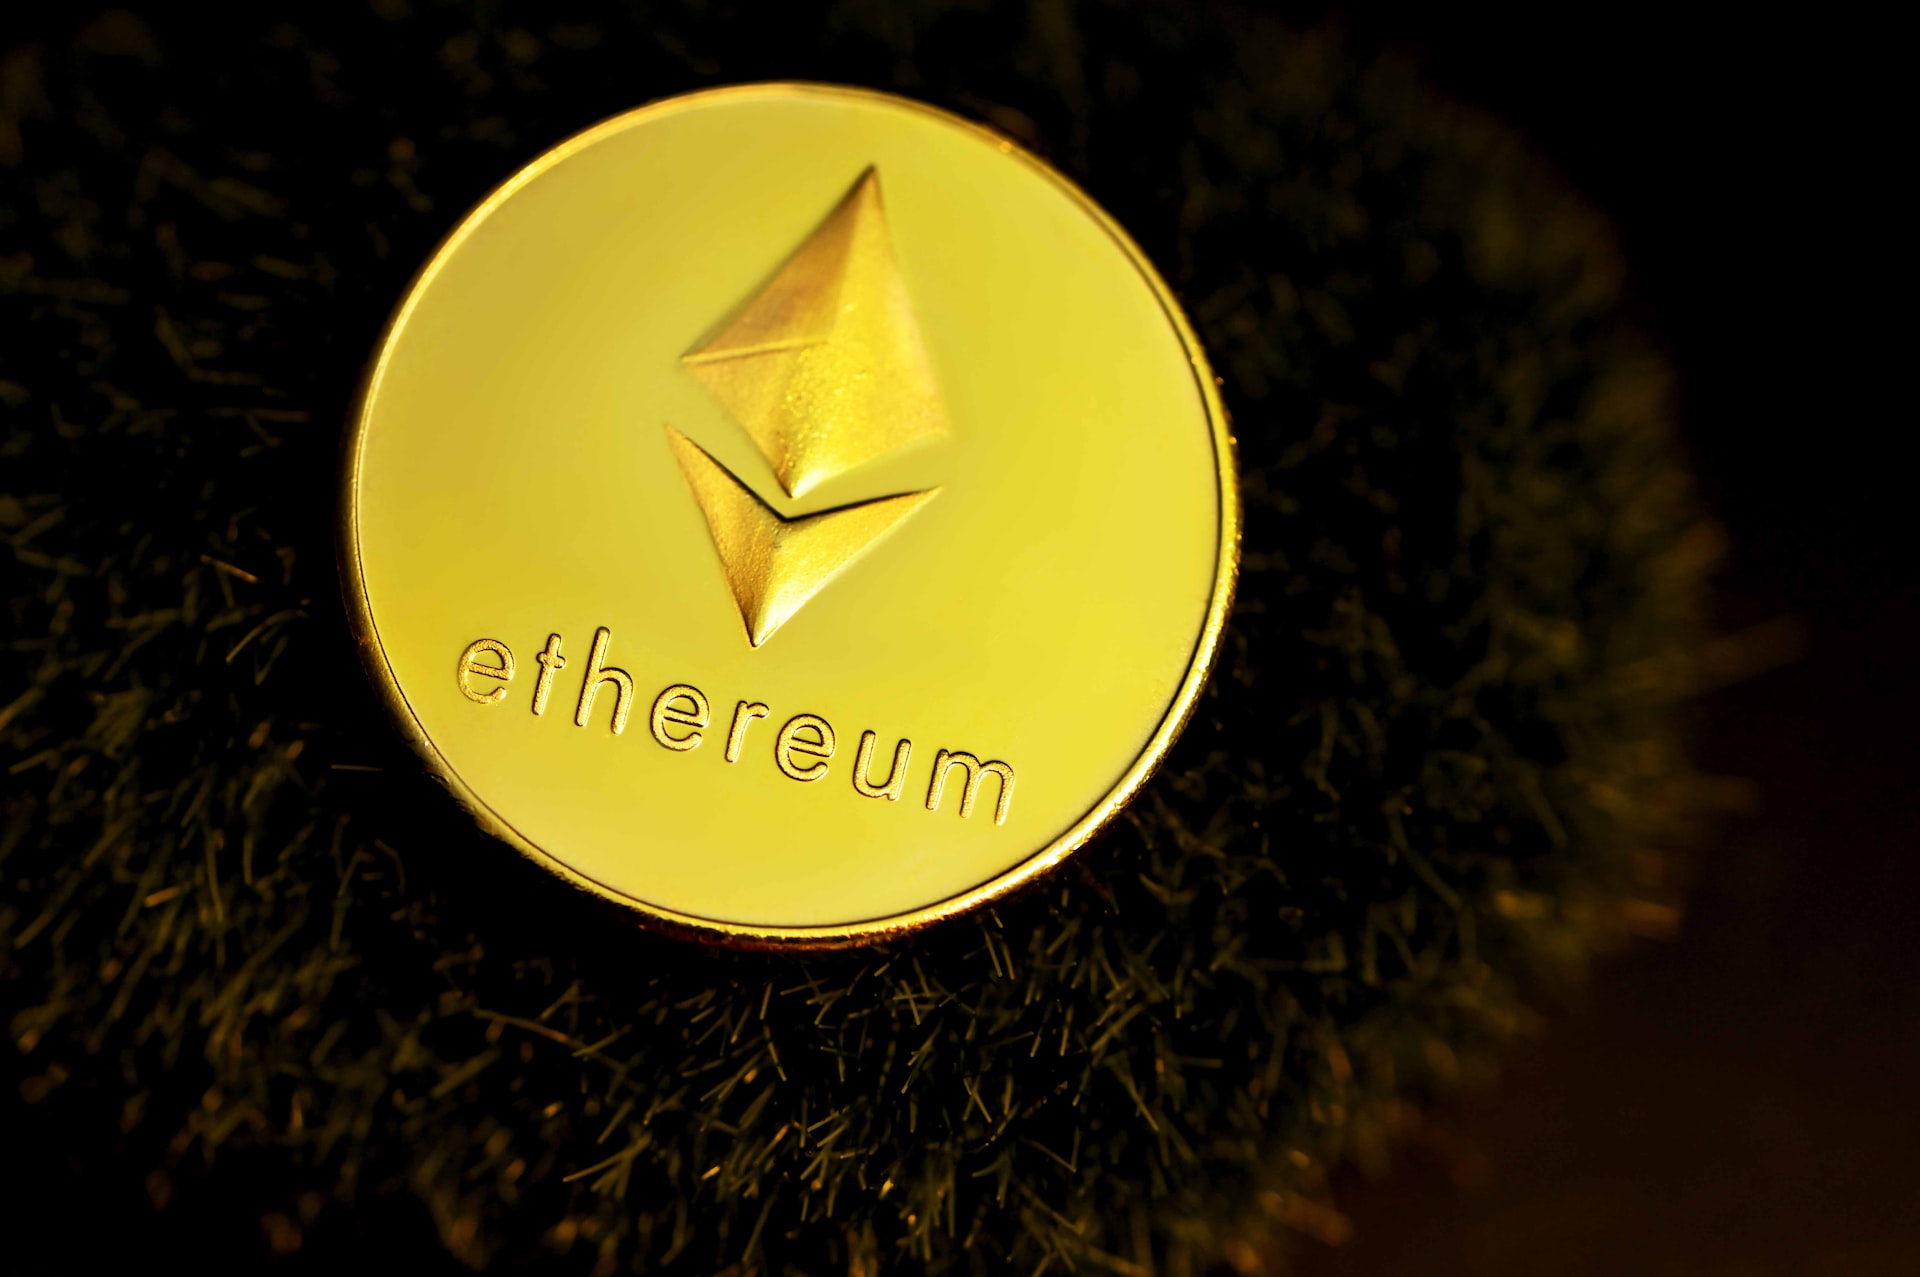 Buy Ethereum With Bank Account